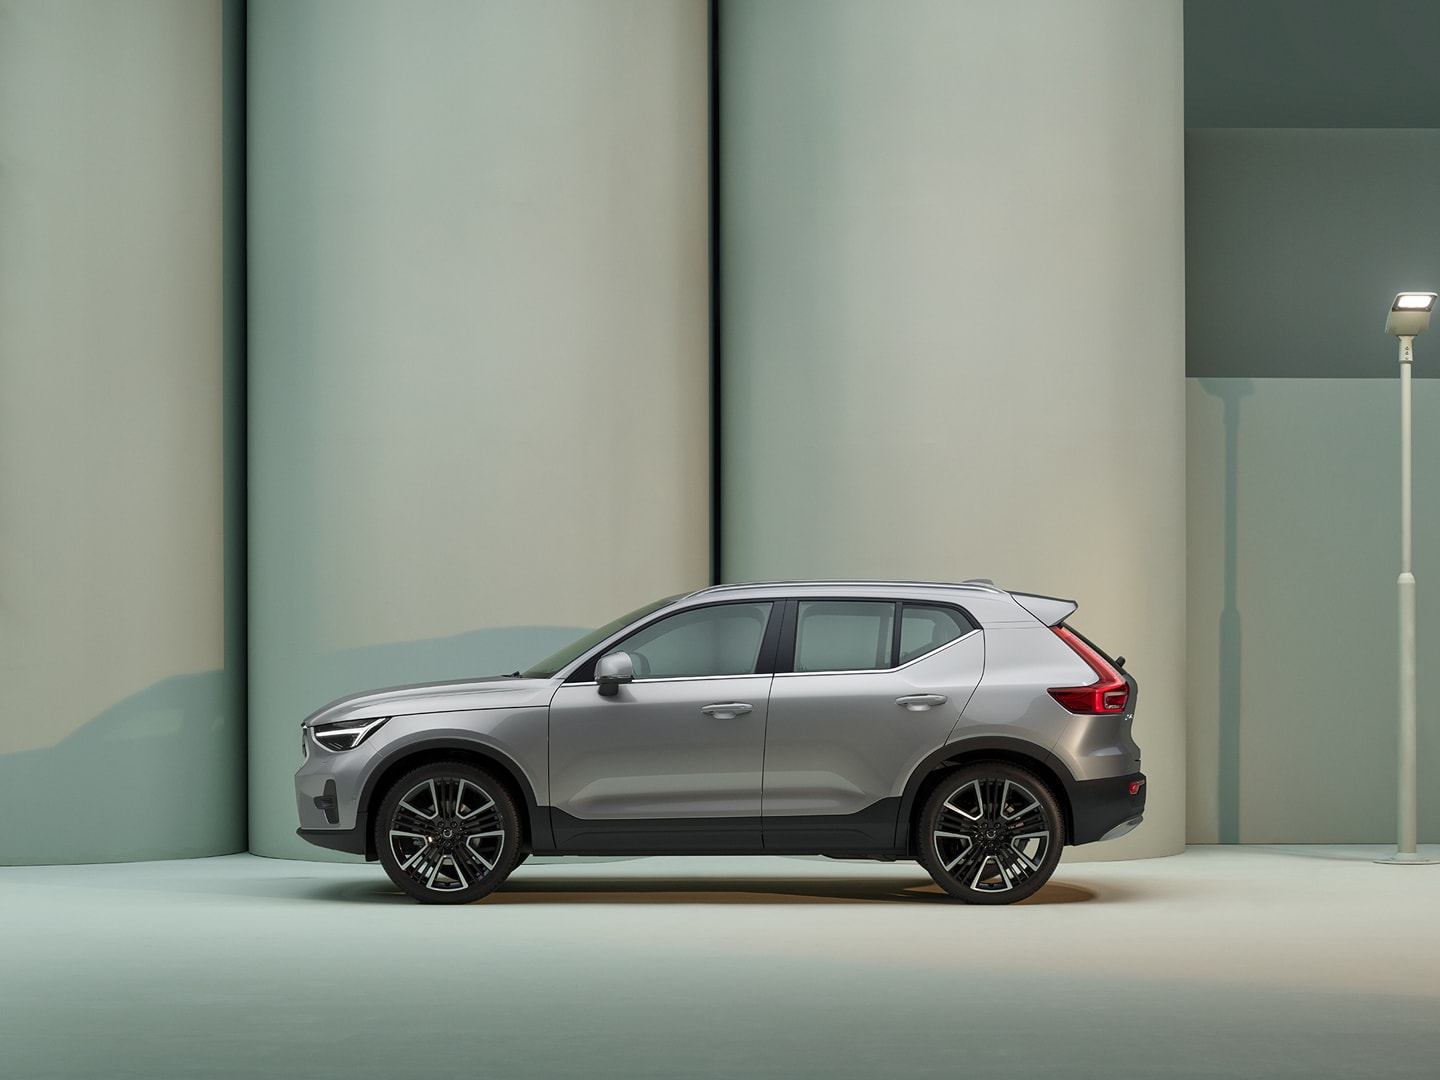 The side profile of a silver Volvo XC40 SUV